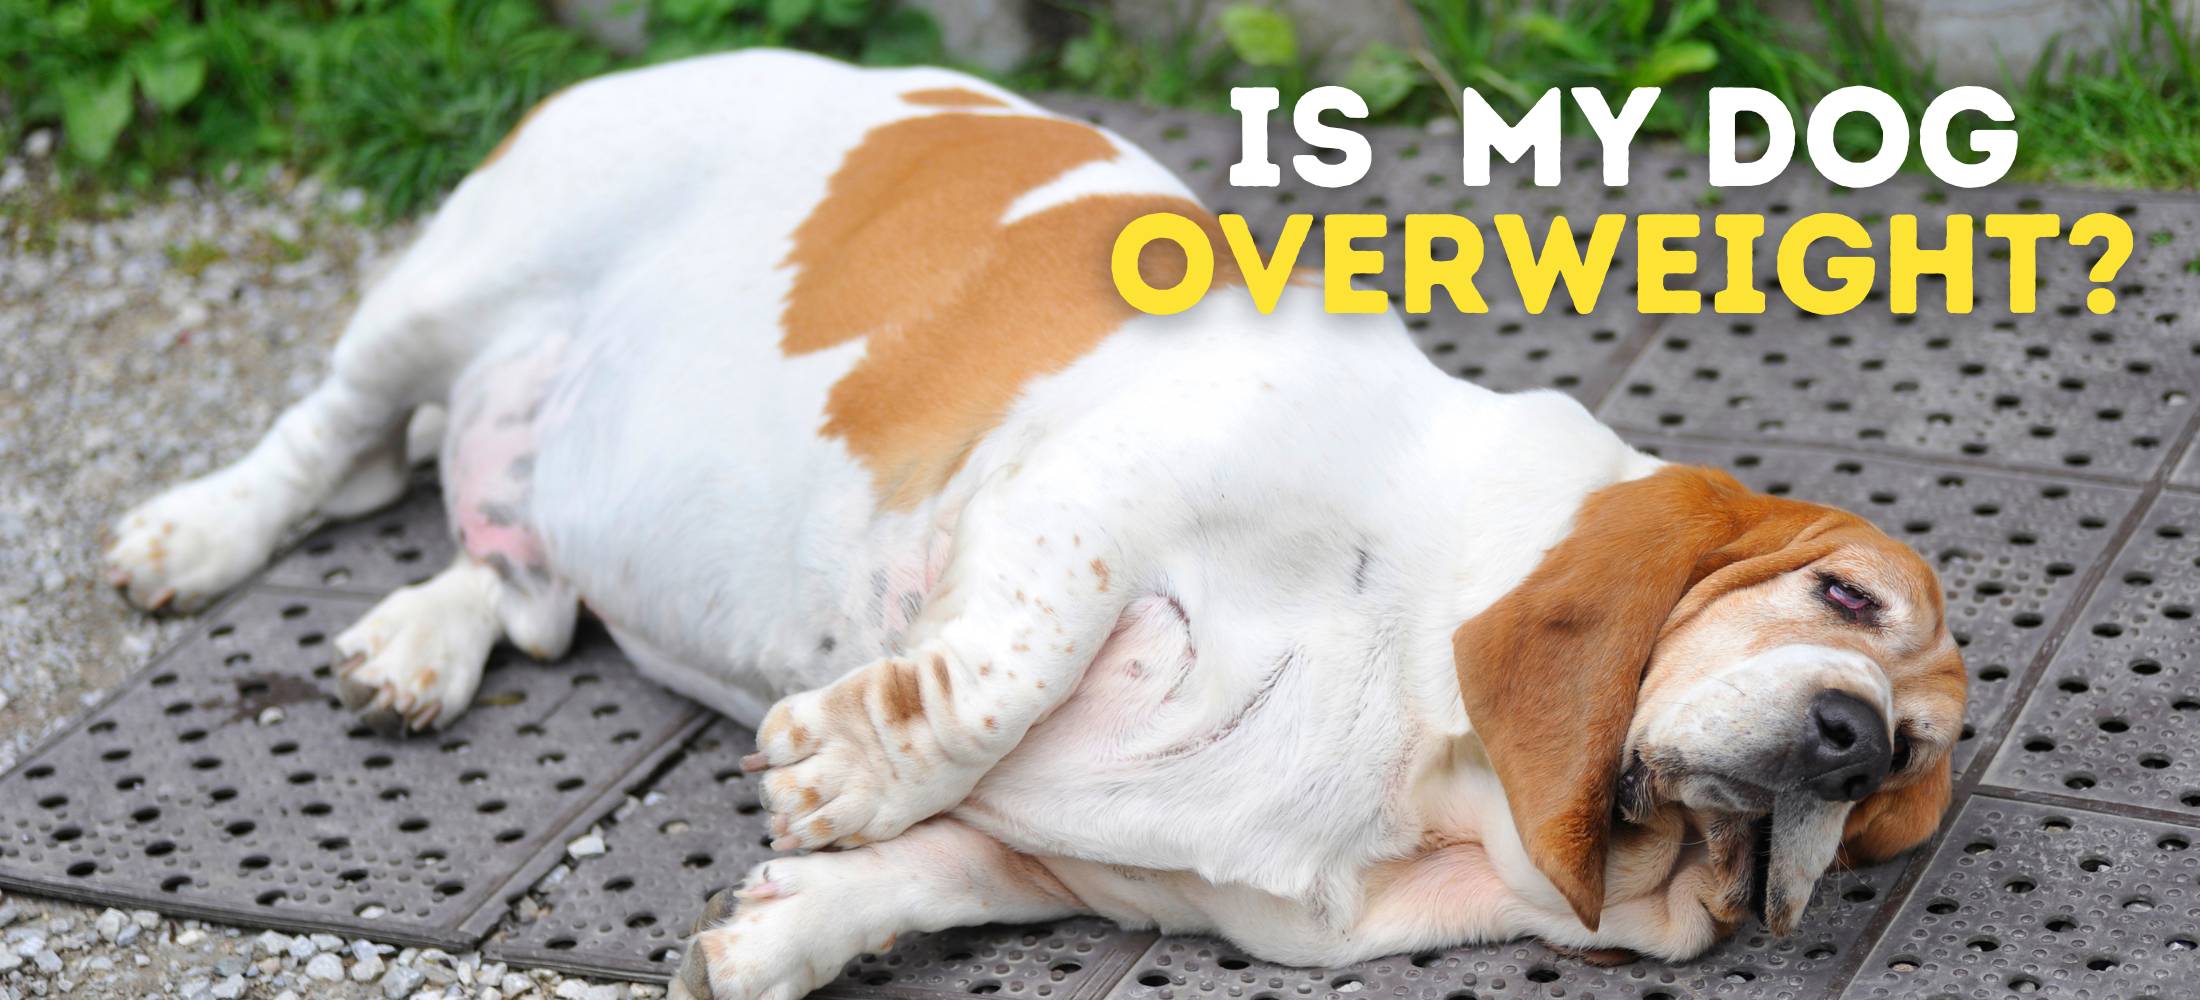 Is My Dog Overweight? Top Tips for Effective Canine Weight Loss!